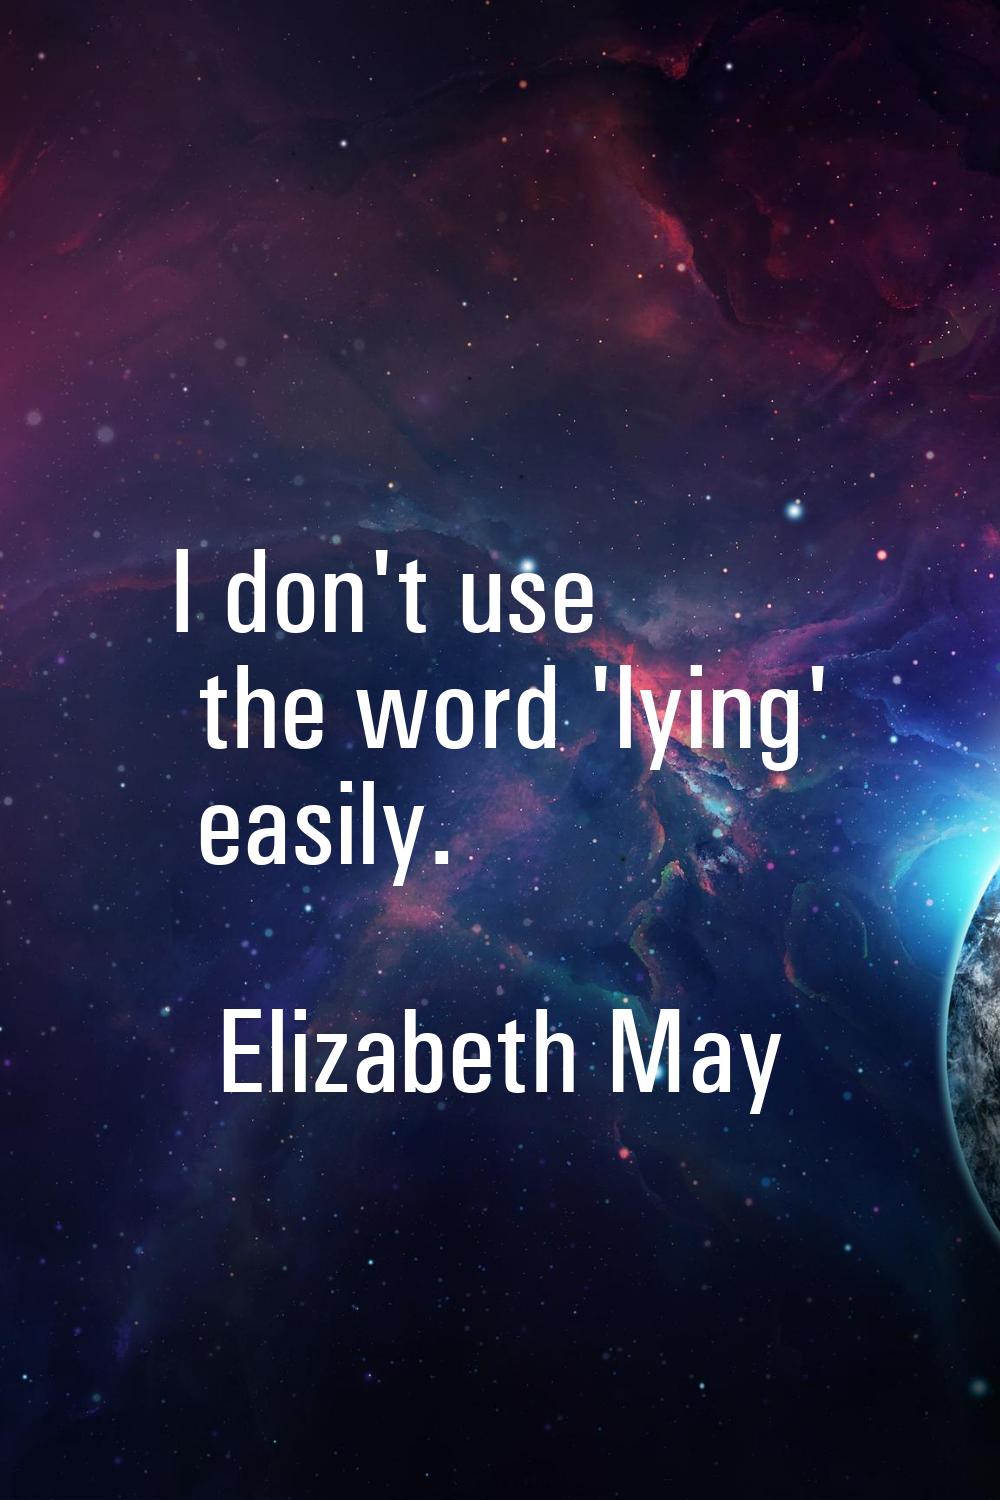 I don't use the word 'lying' easily.